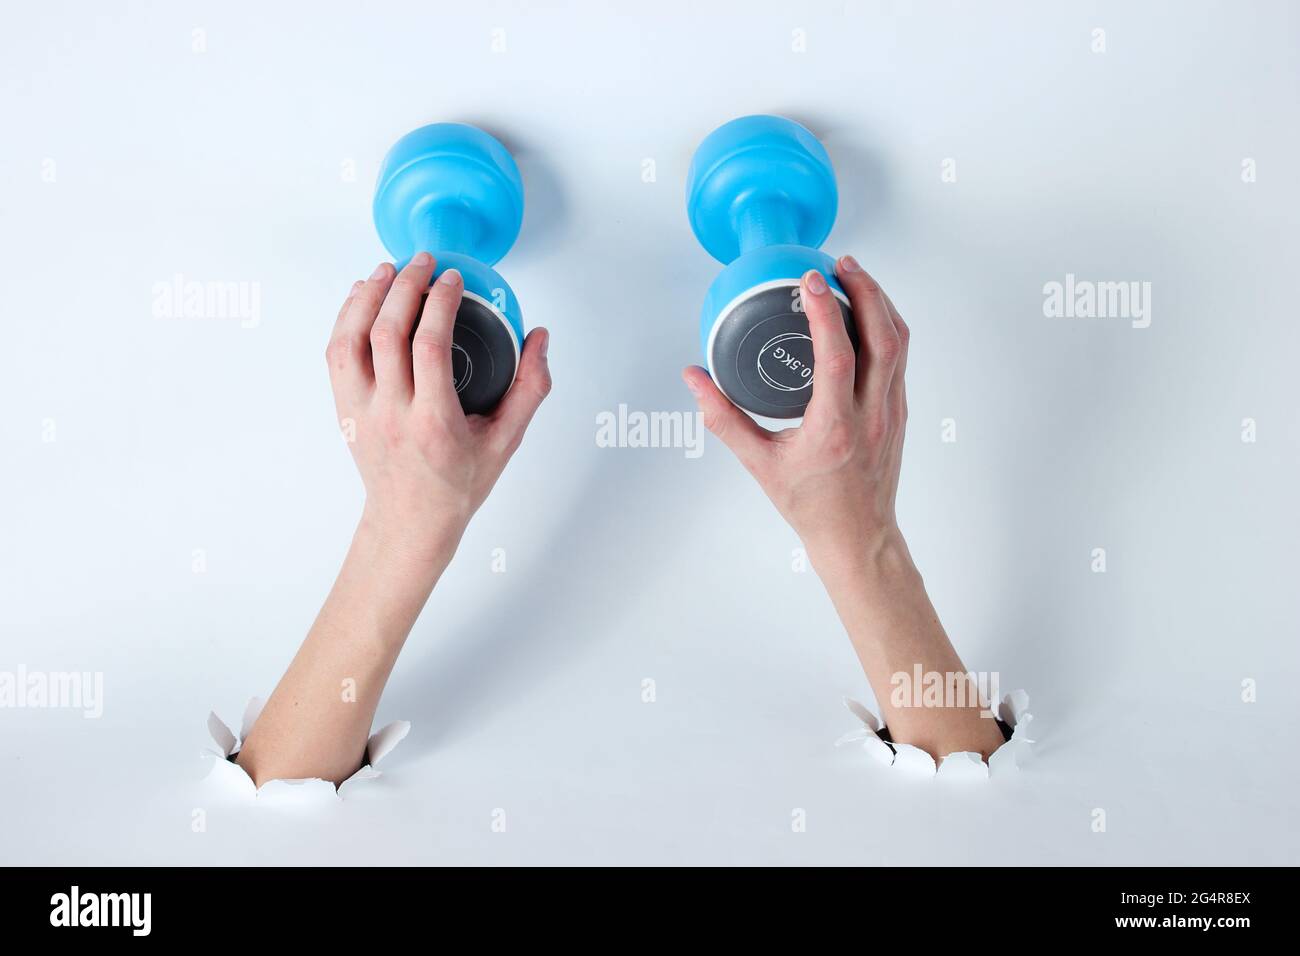 Female hands holding a dumbbell through the torn holes of white background. Creative sports art Stock Photo